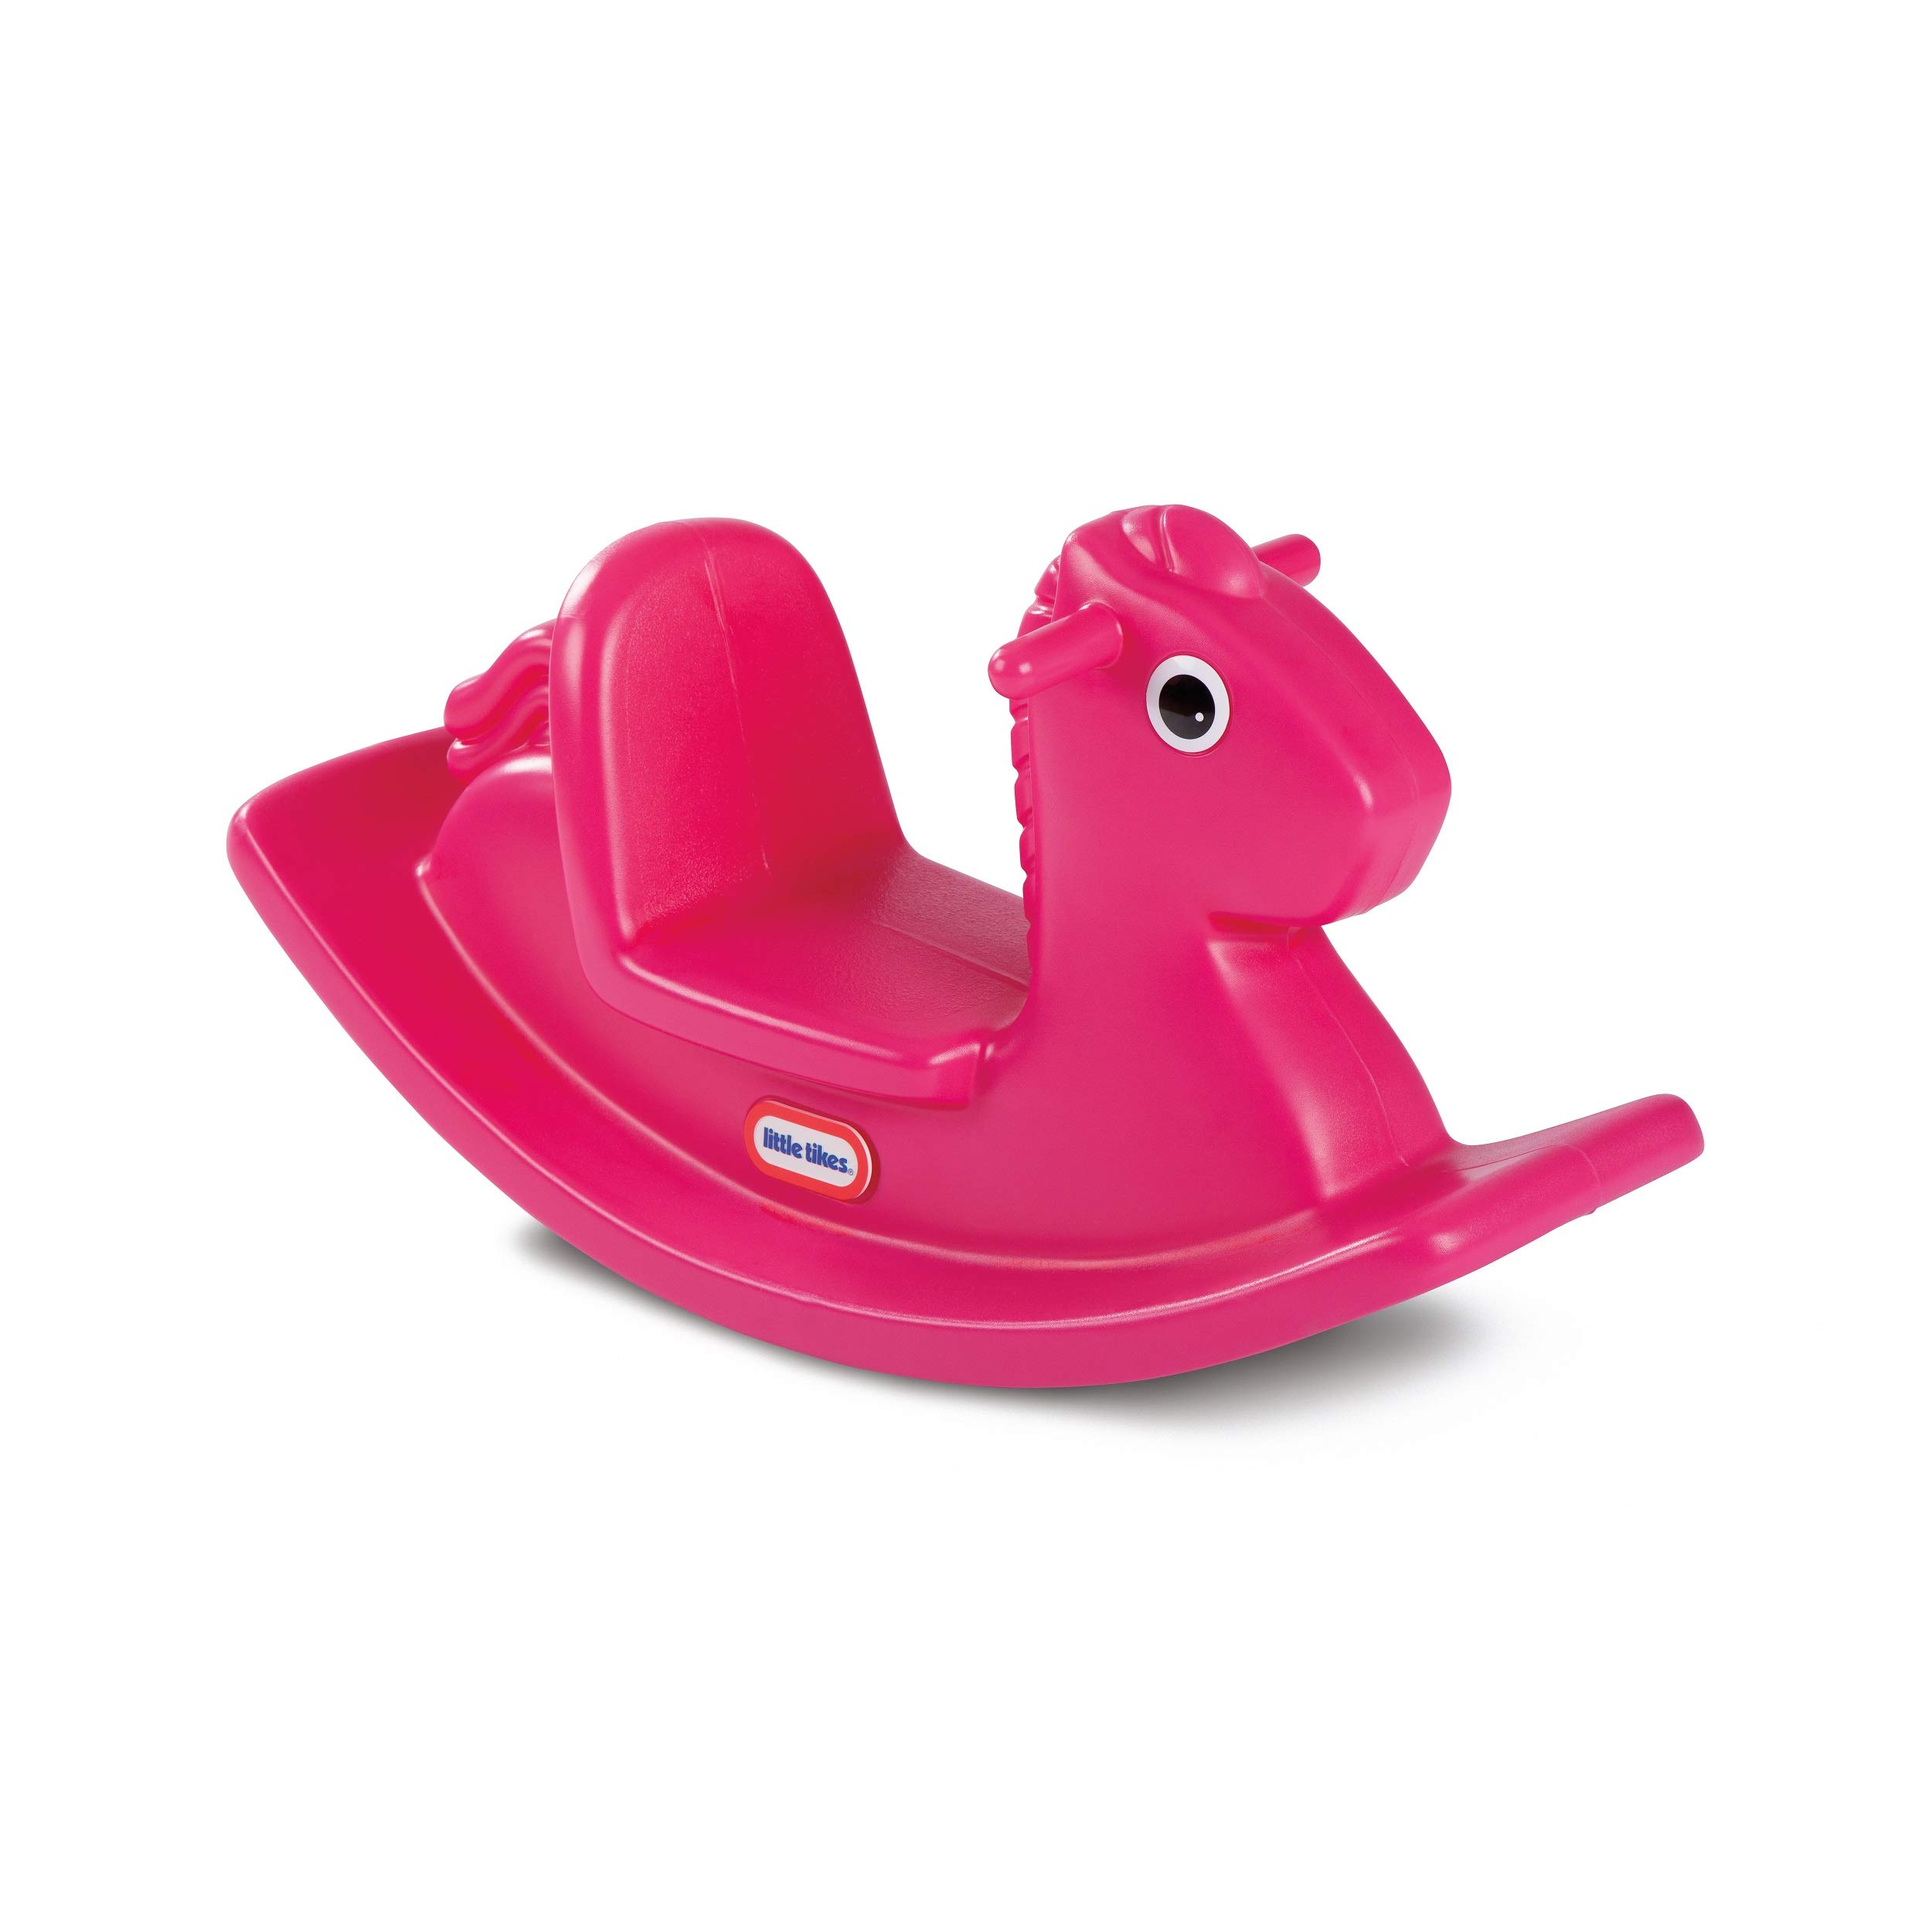 Best Little Tikes Pony Riding Toy for Kids in 2023